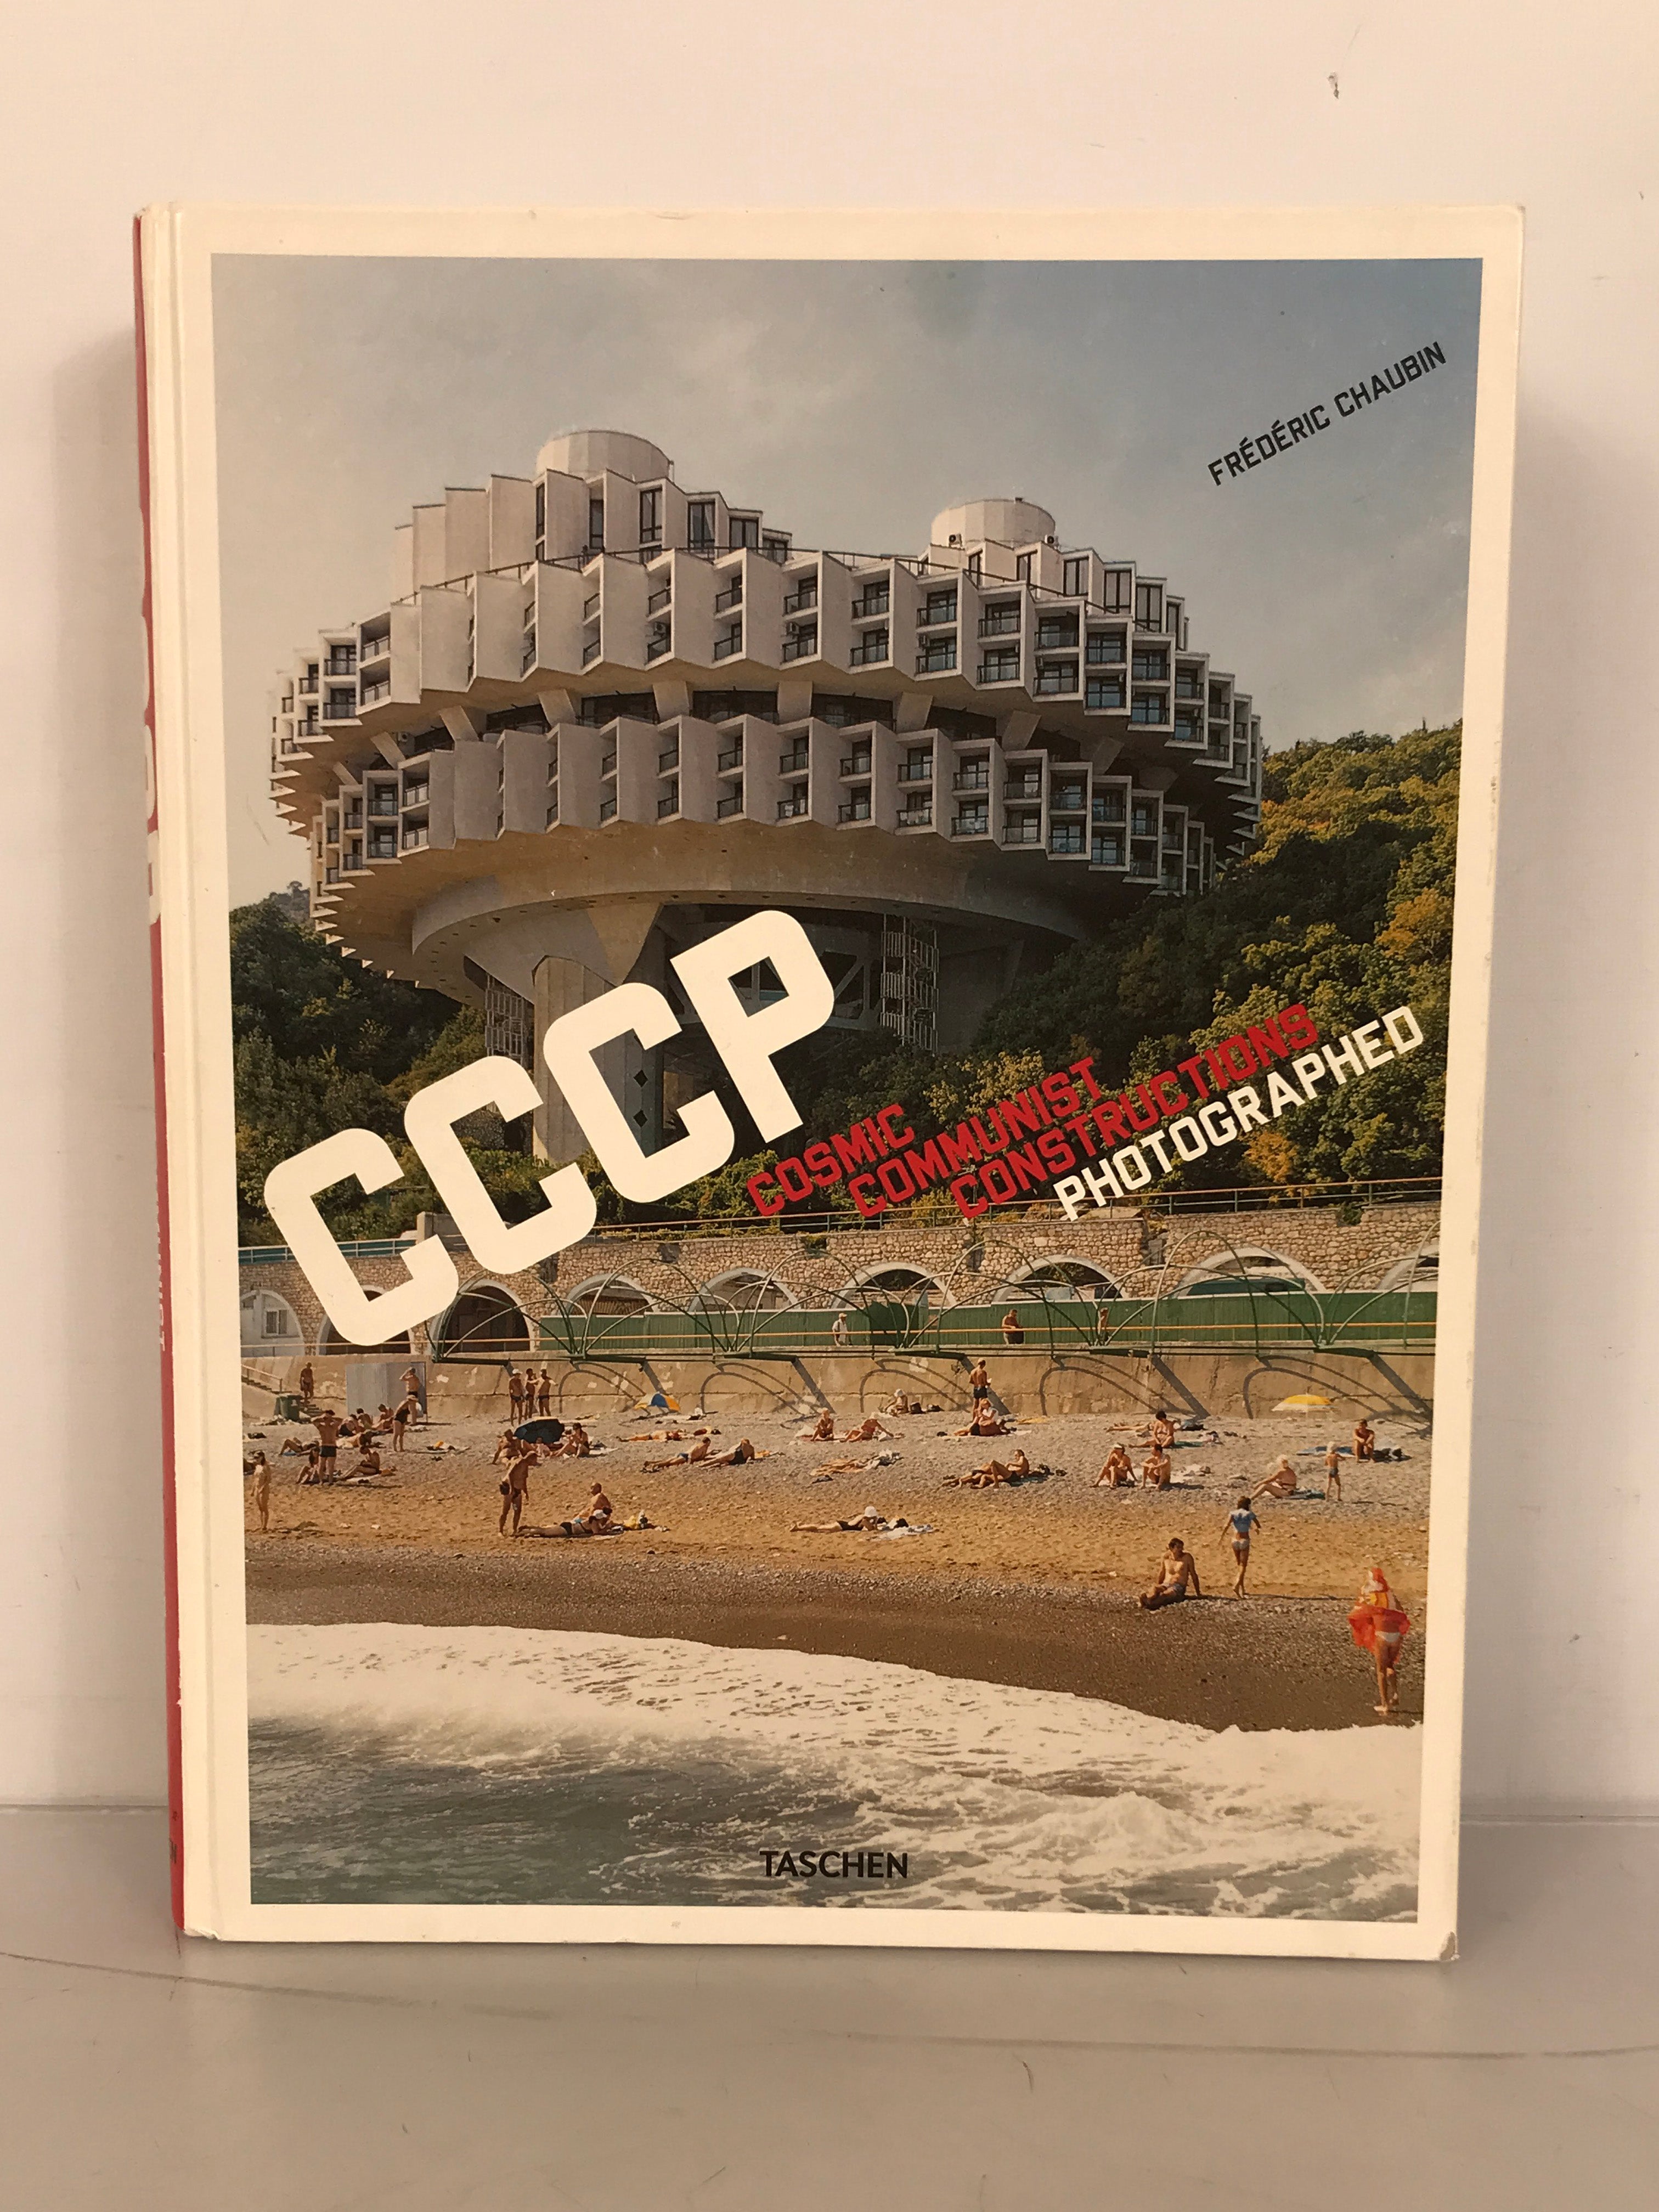 CCCP: Cosmic Communist Constructions Photographed by Frederic Chaubin 2011 HC